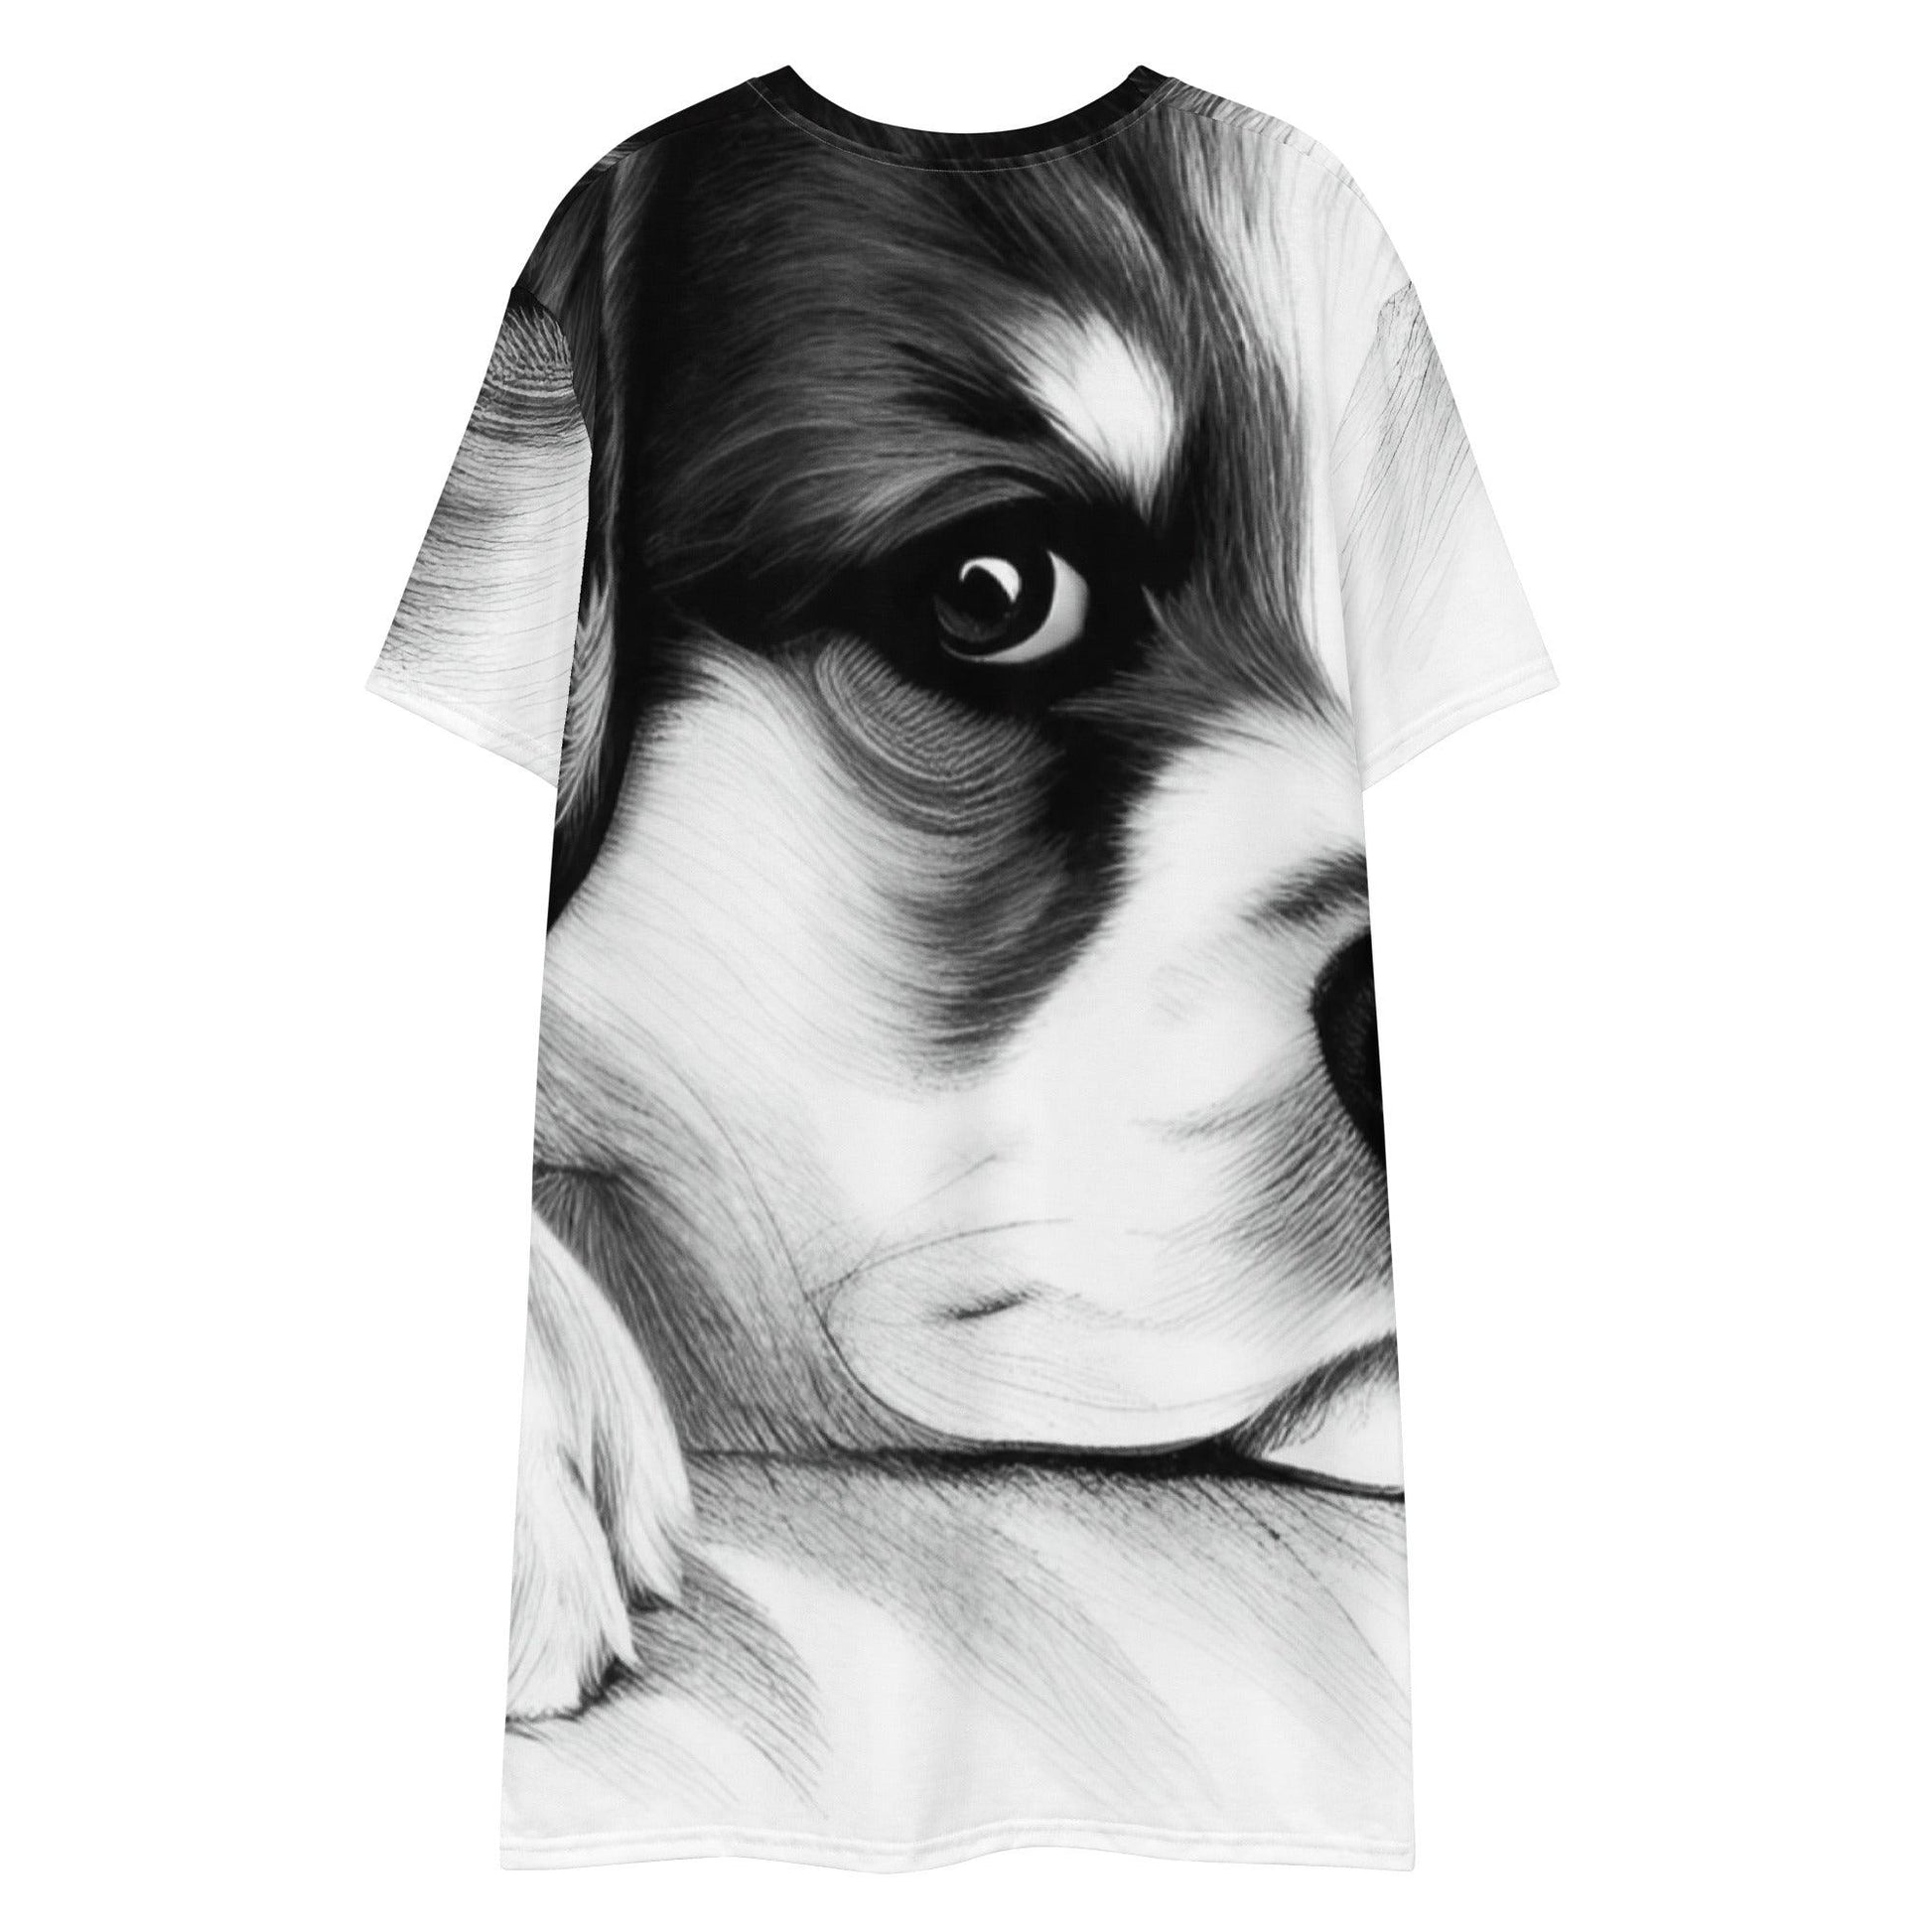 Puppy Love 3 - Womens T-Shirt Dress - iSAW Company